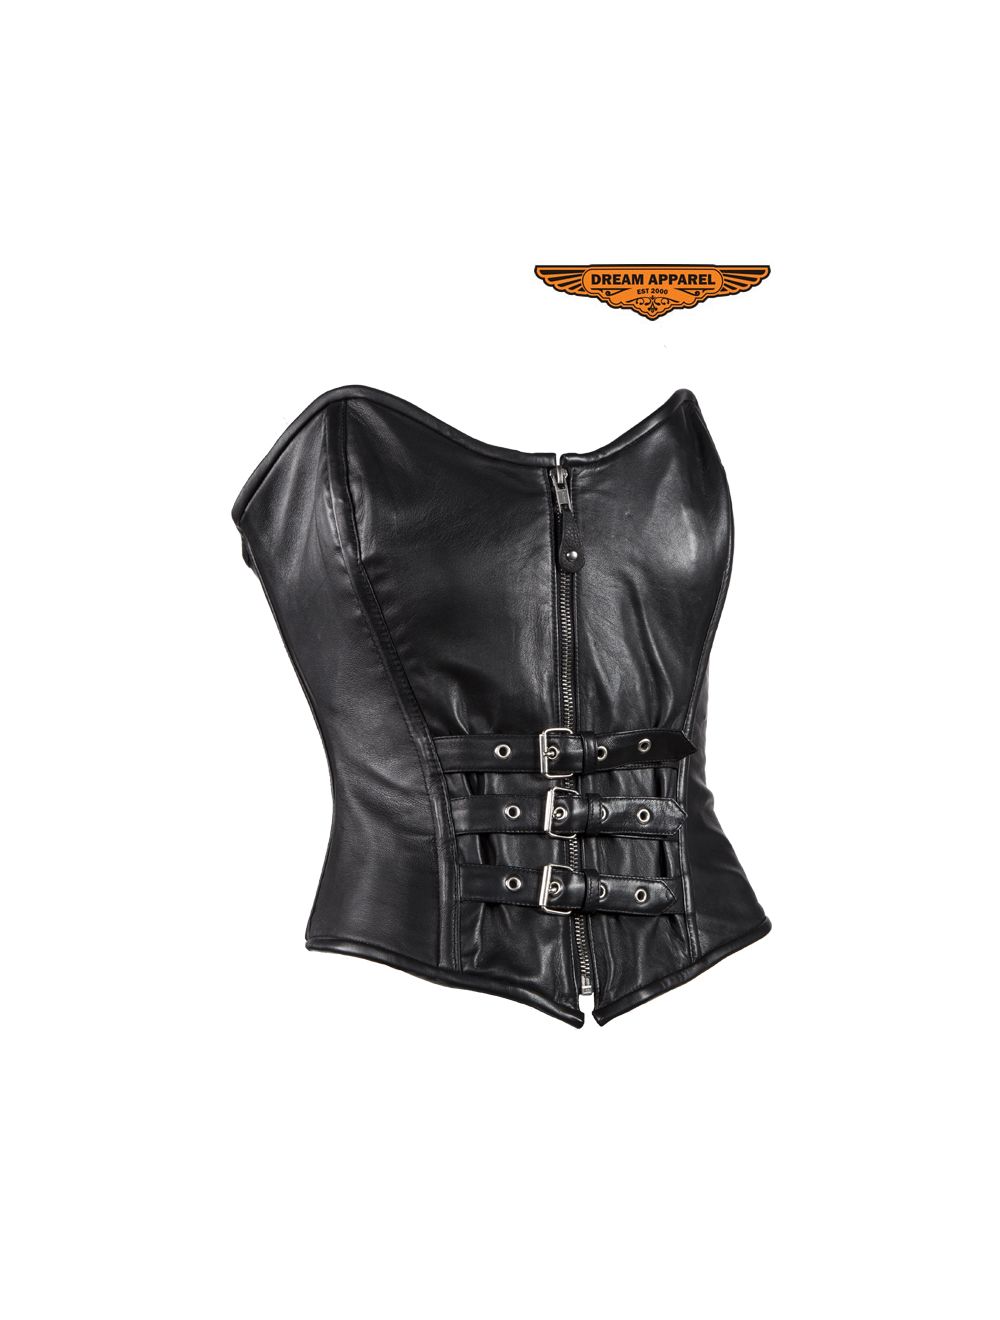 Women's Strapless Leather Corset With Zipper, Buckle & Lace